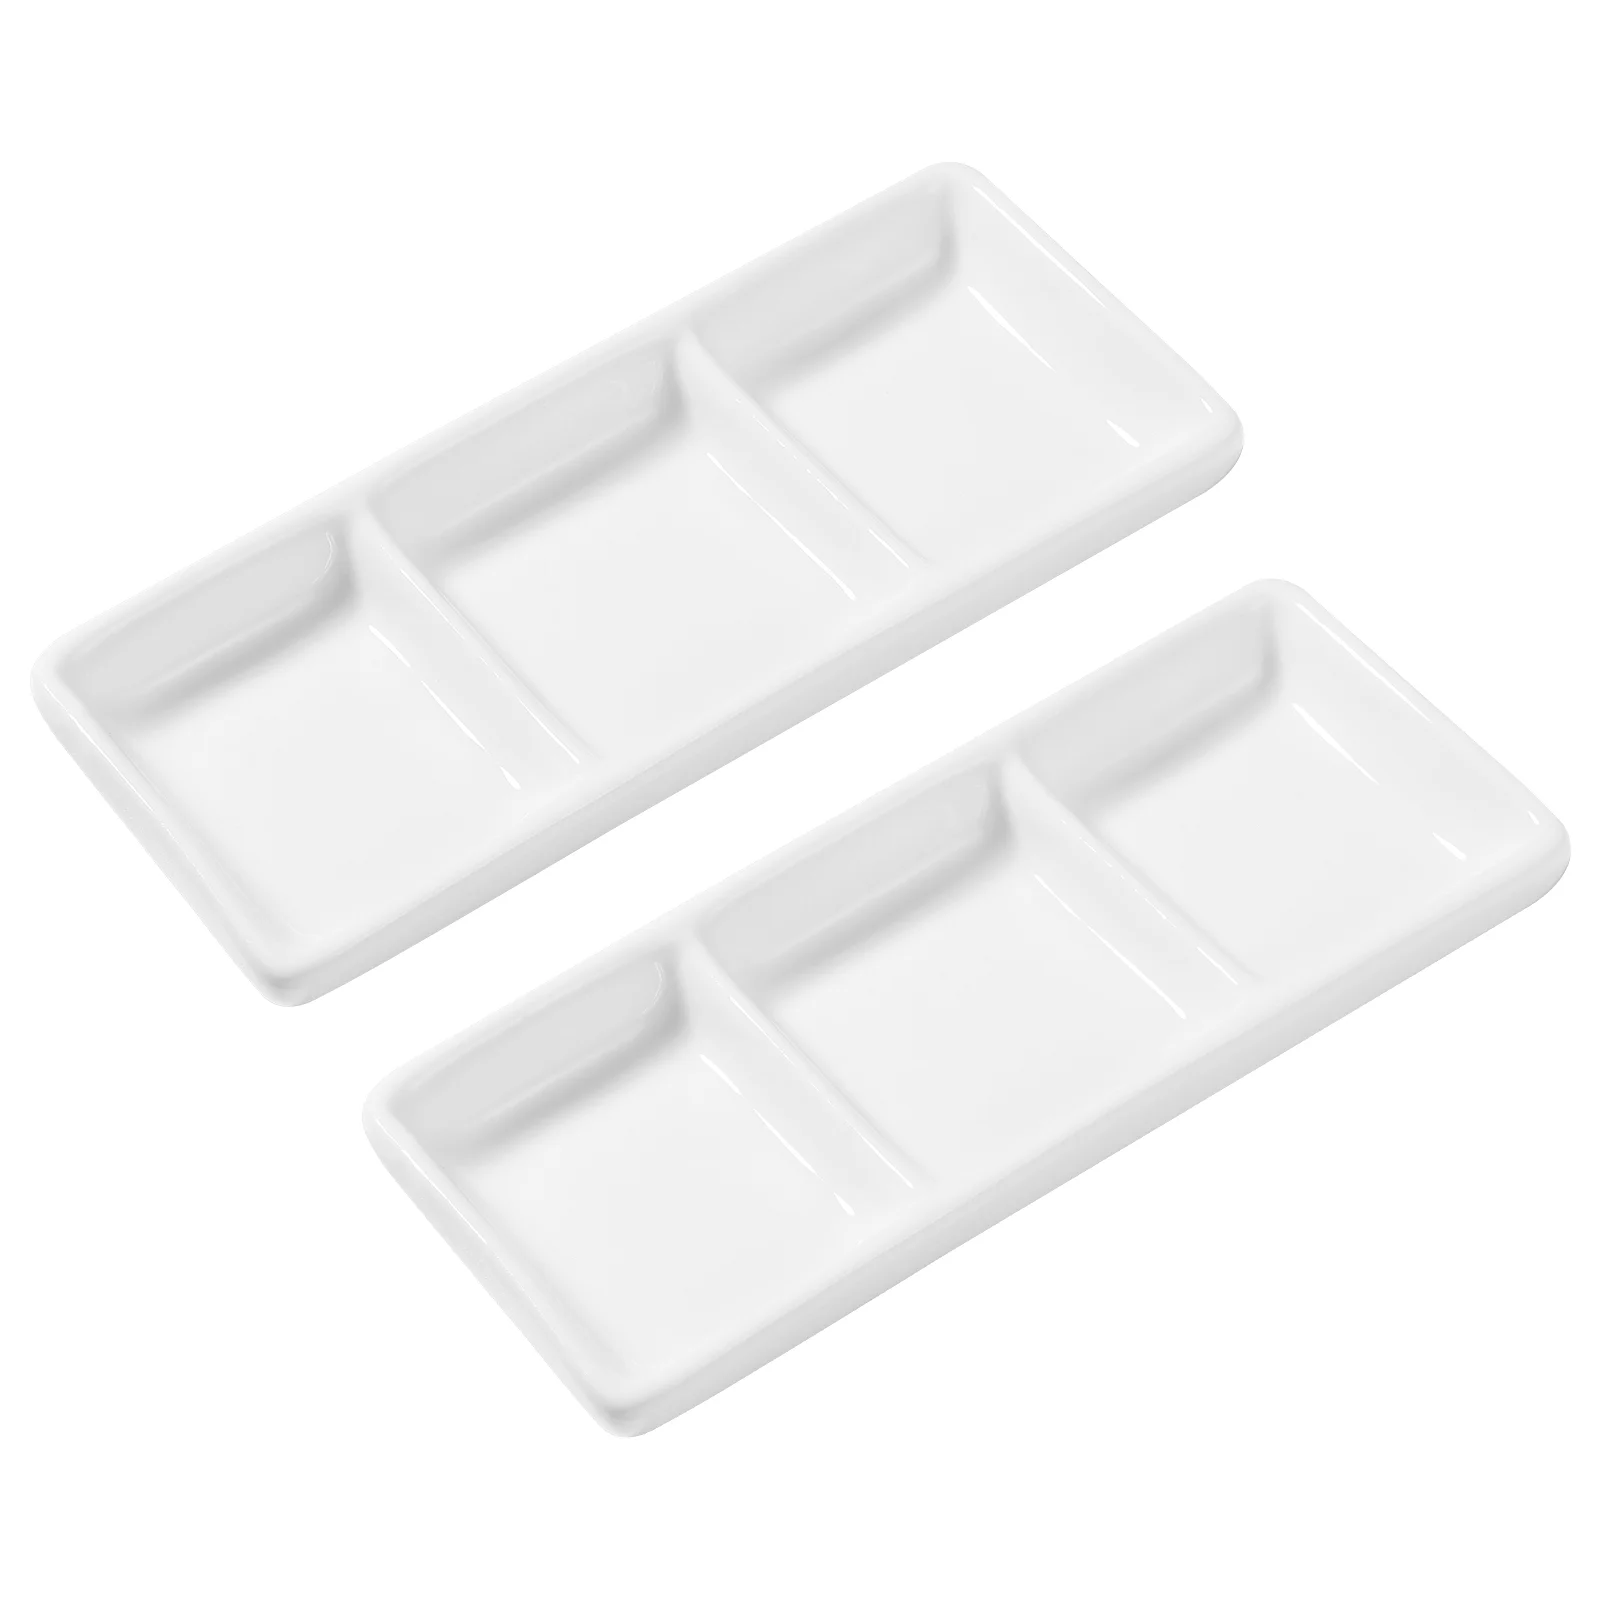 

Tray Serving Sauce Dish Divided Appetizer Soy Dishes Bowls Dipping Compartment Platter White Cups Rectangular Condiment Snack